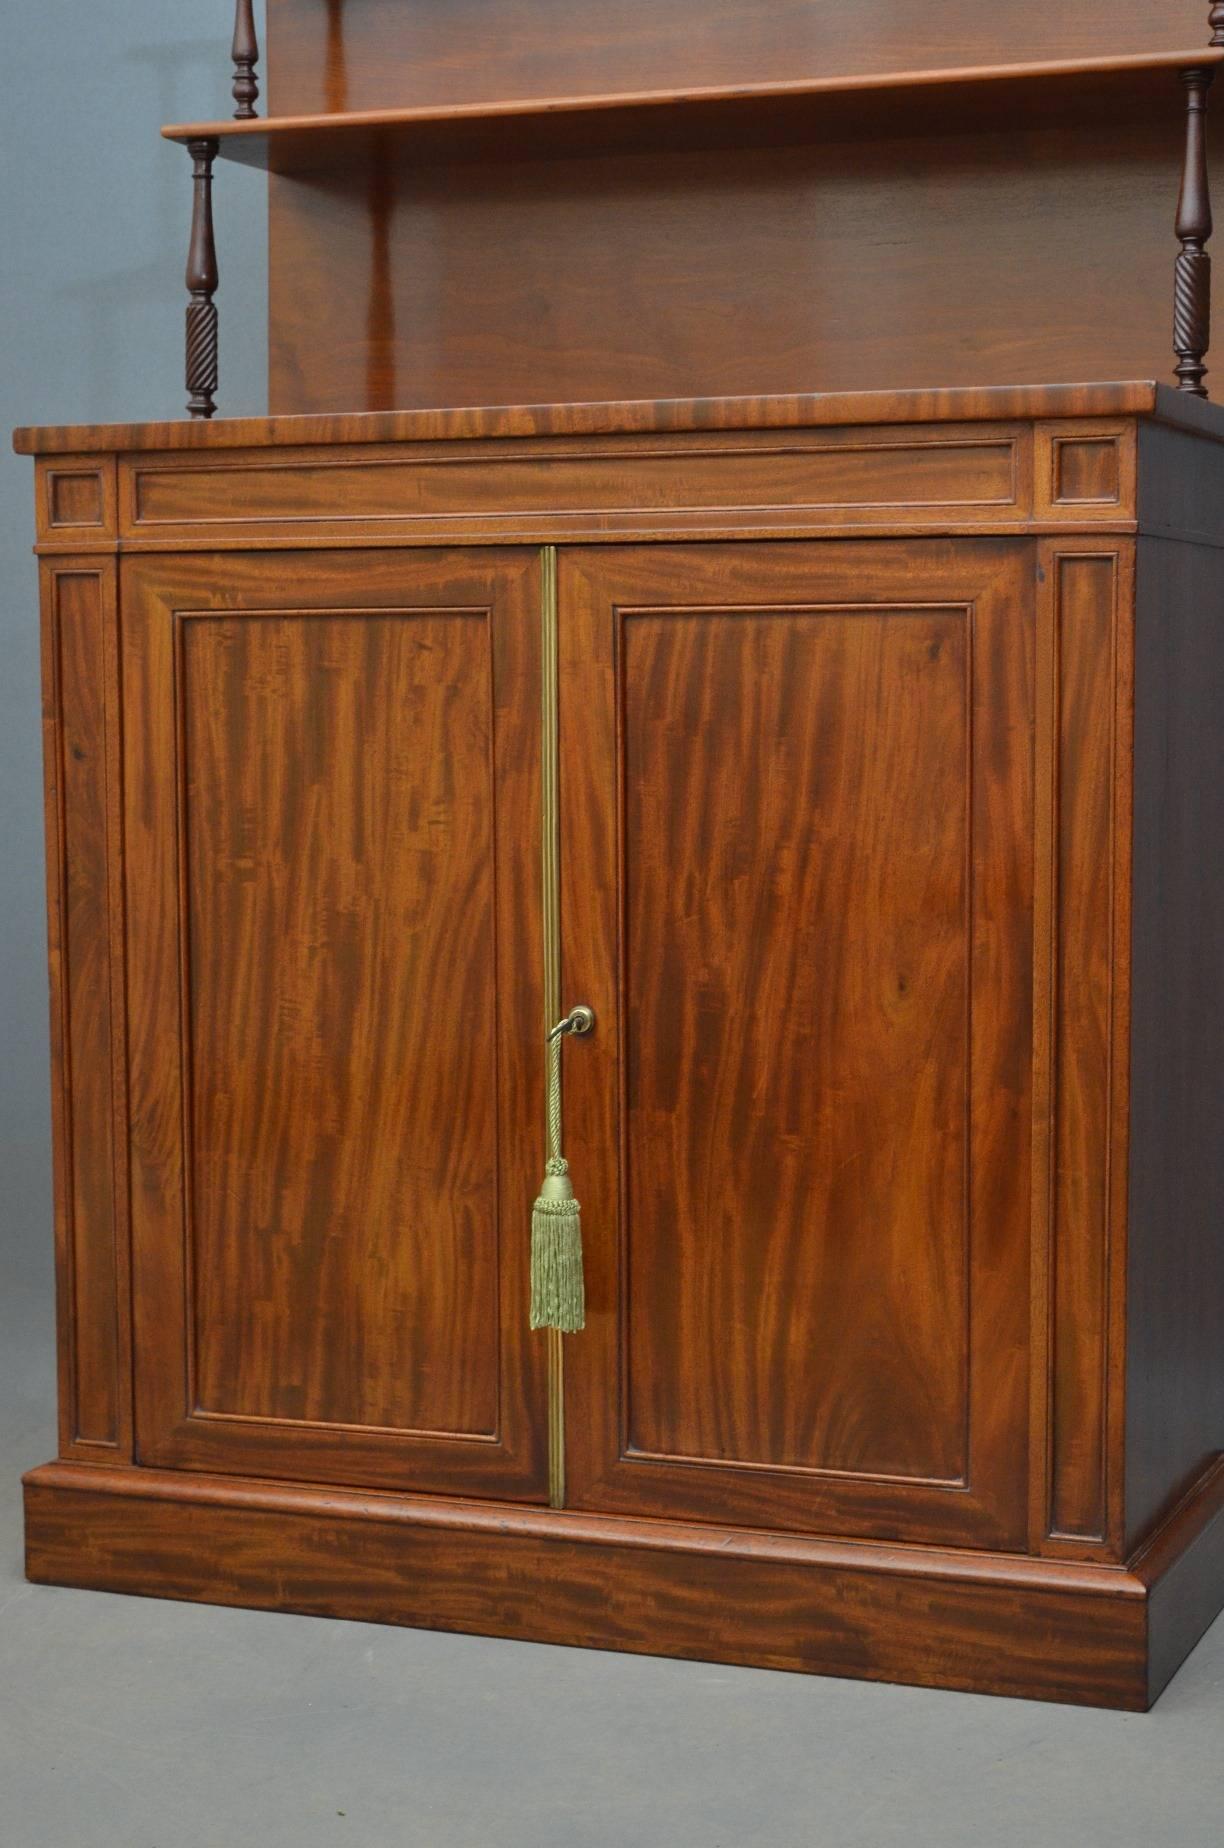 Mid-19th Century William IV Mahogany Chiffonier, Two-Door Sideboard For Sale